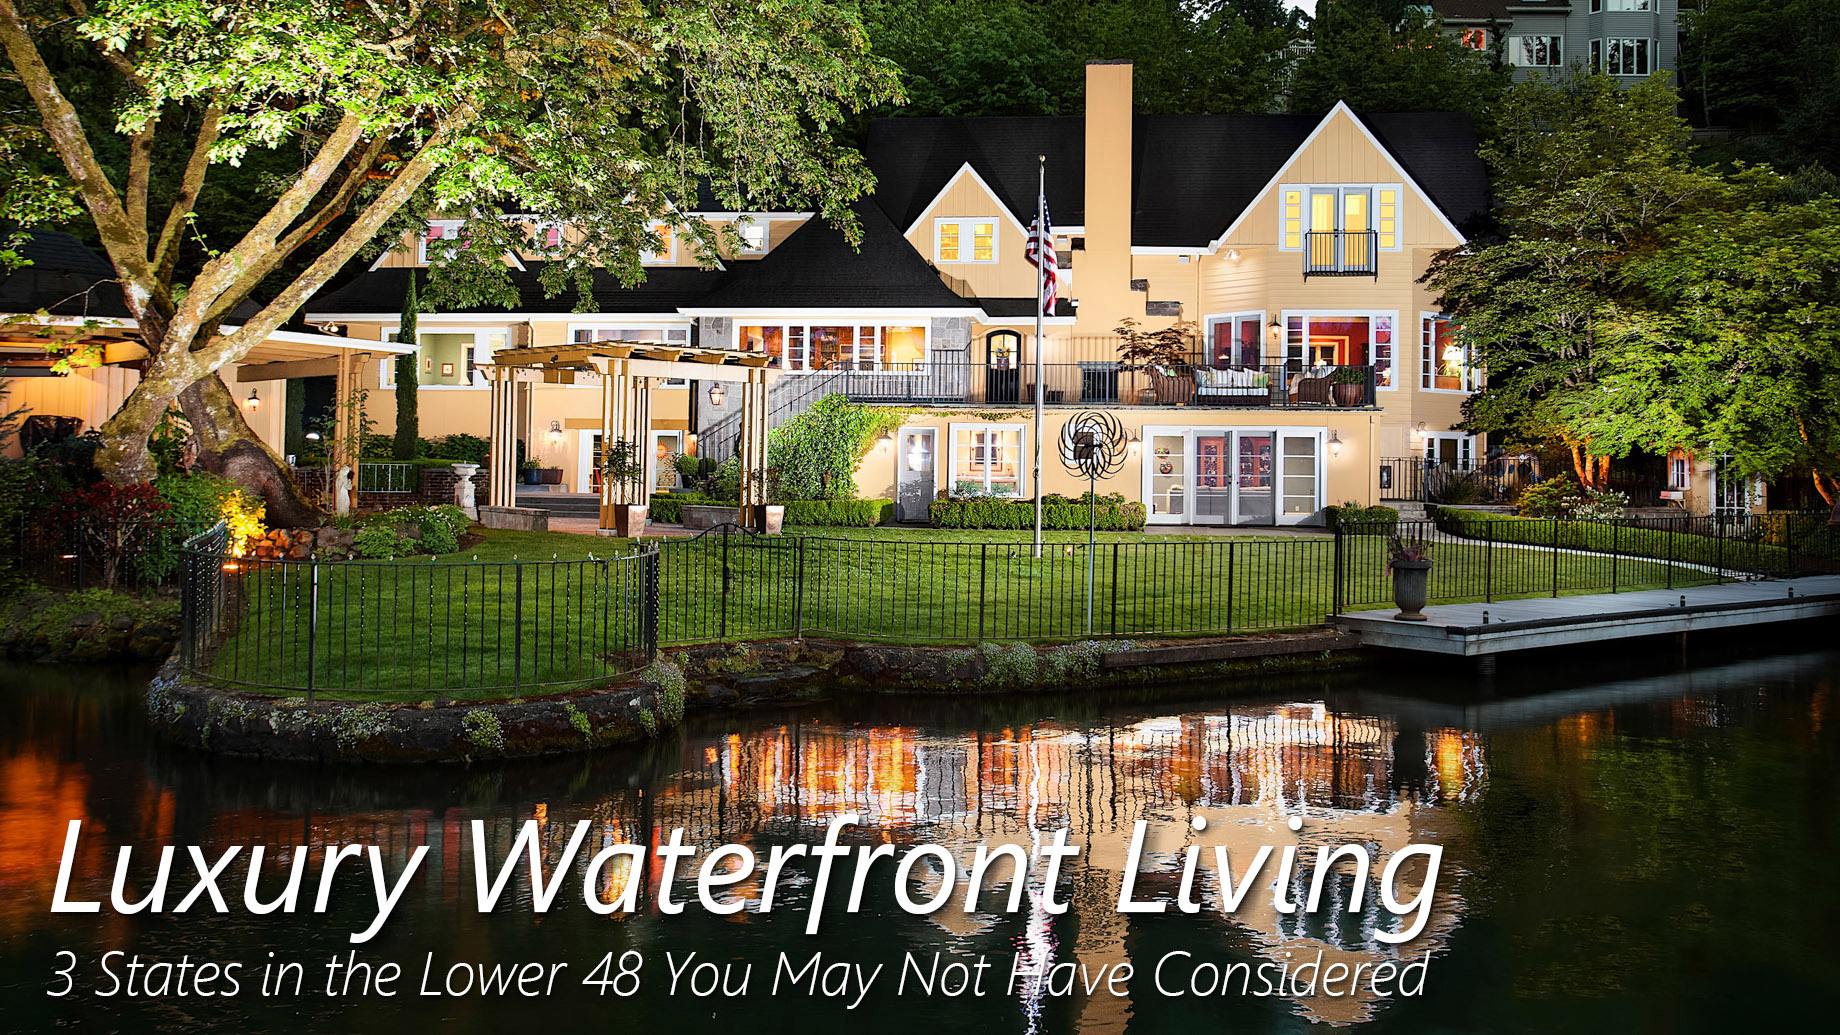 Luxury Waterfront Living - 3 States in the Lower 48 You May Not Have Considered